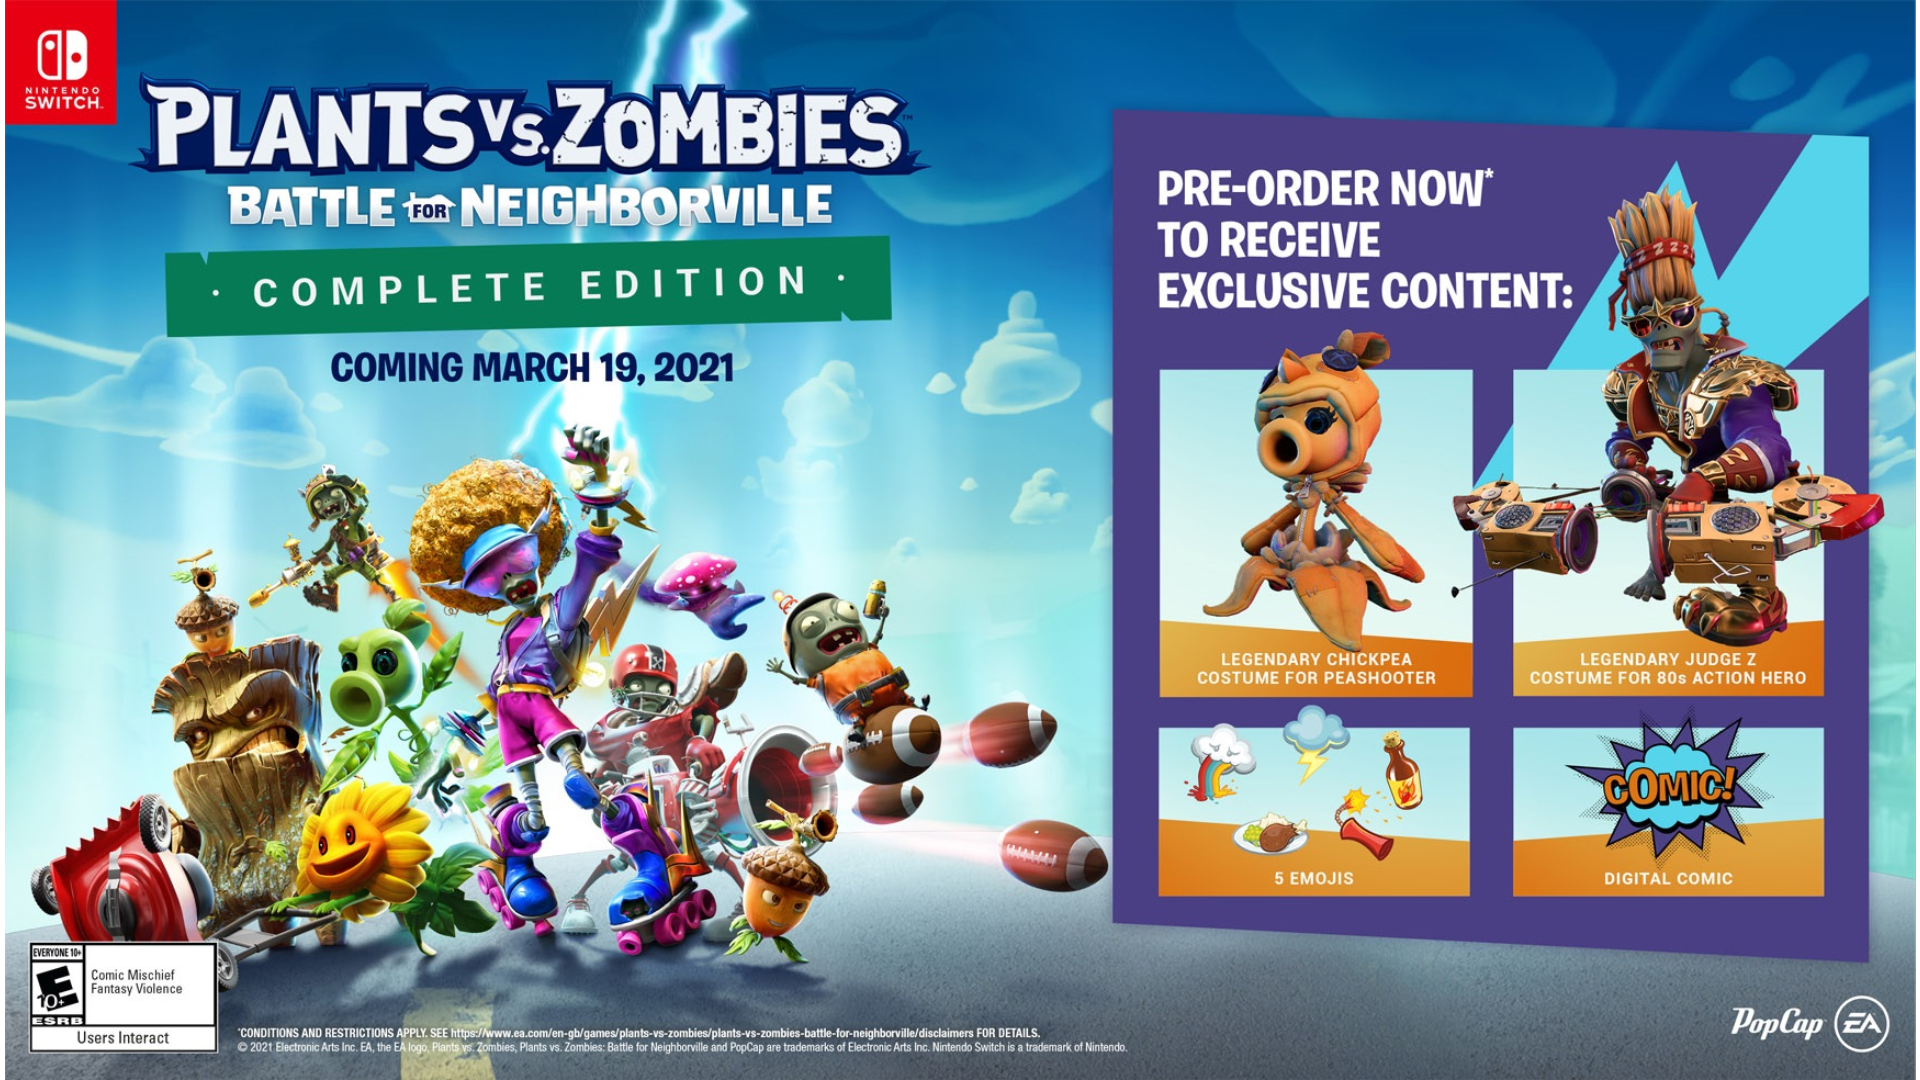 Plants vs. Zombies: Battle for Neighborville Complete Edition - Nintendo Switch - image 2 of 2